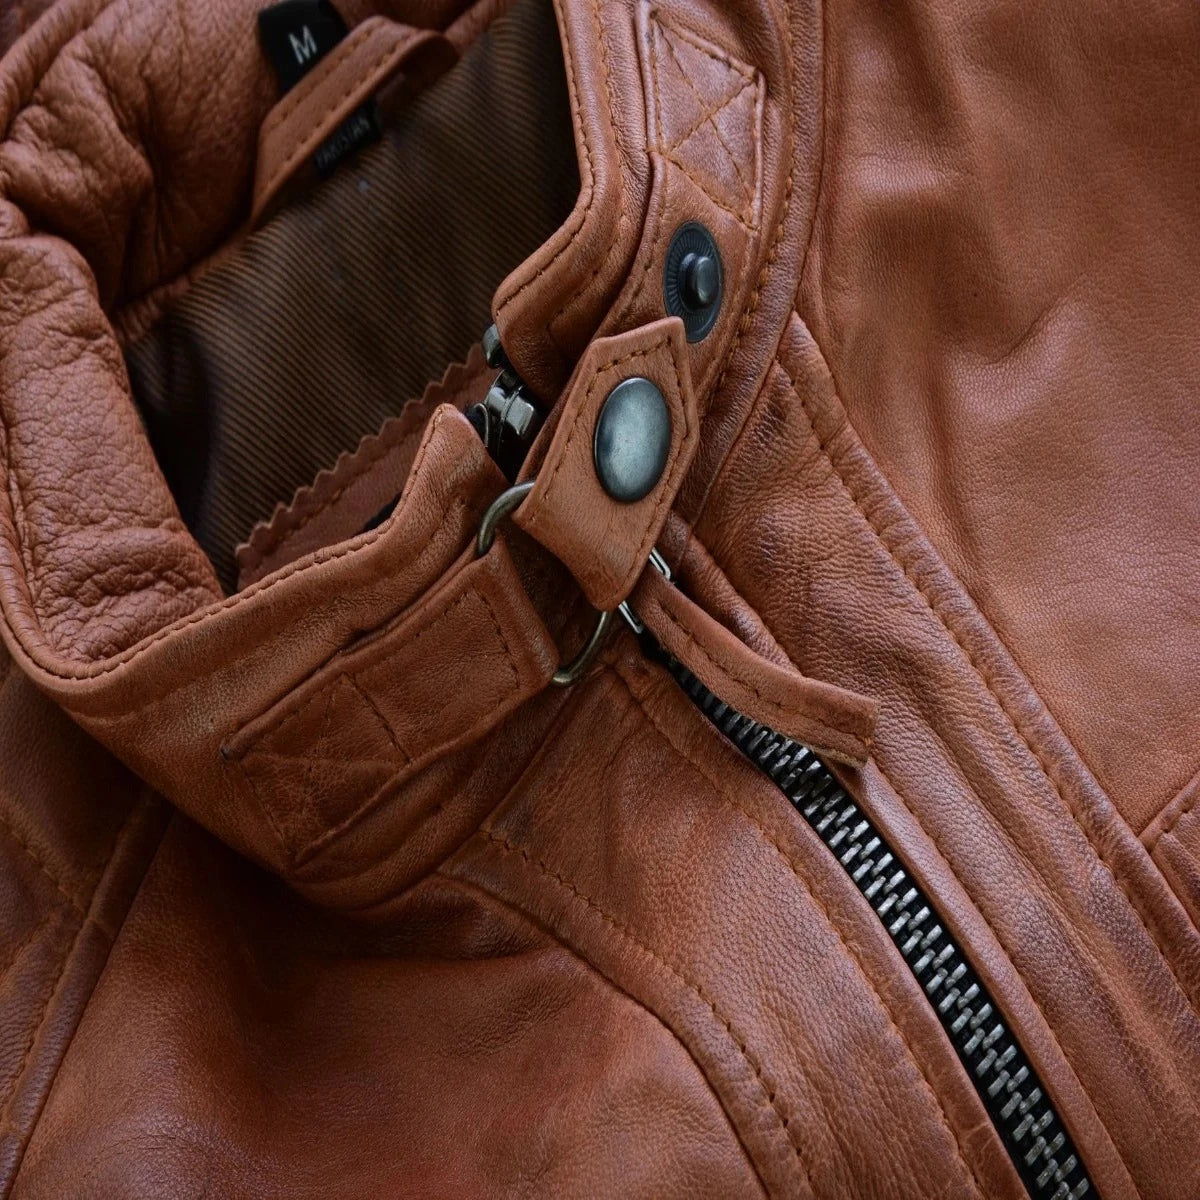 A close up of the Vance Cafe Racer Austin Brown Leather Jacket, a functional and fashionable lambskin leather jacket.